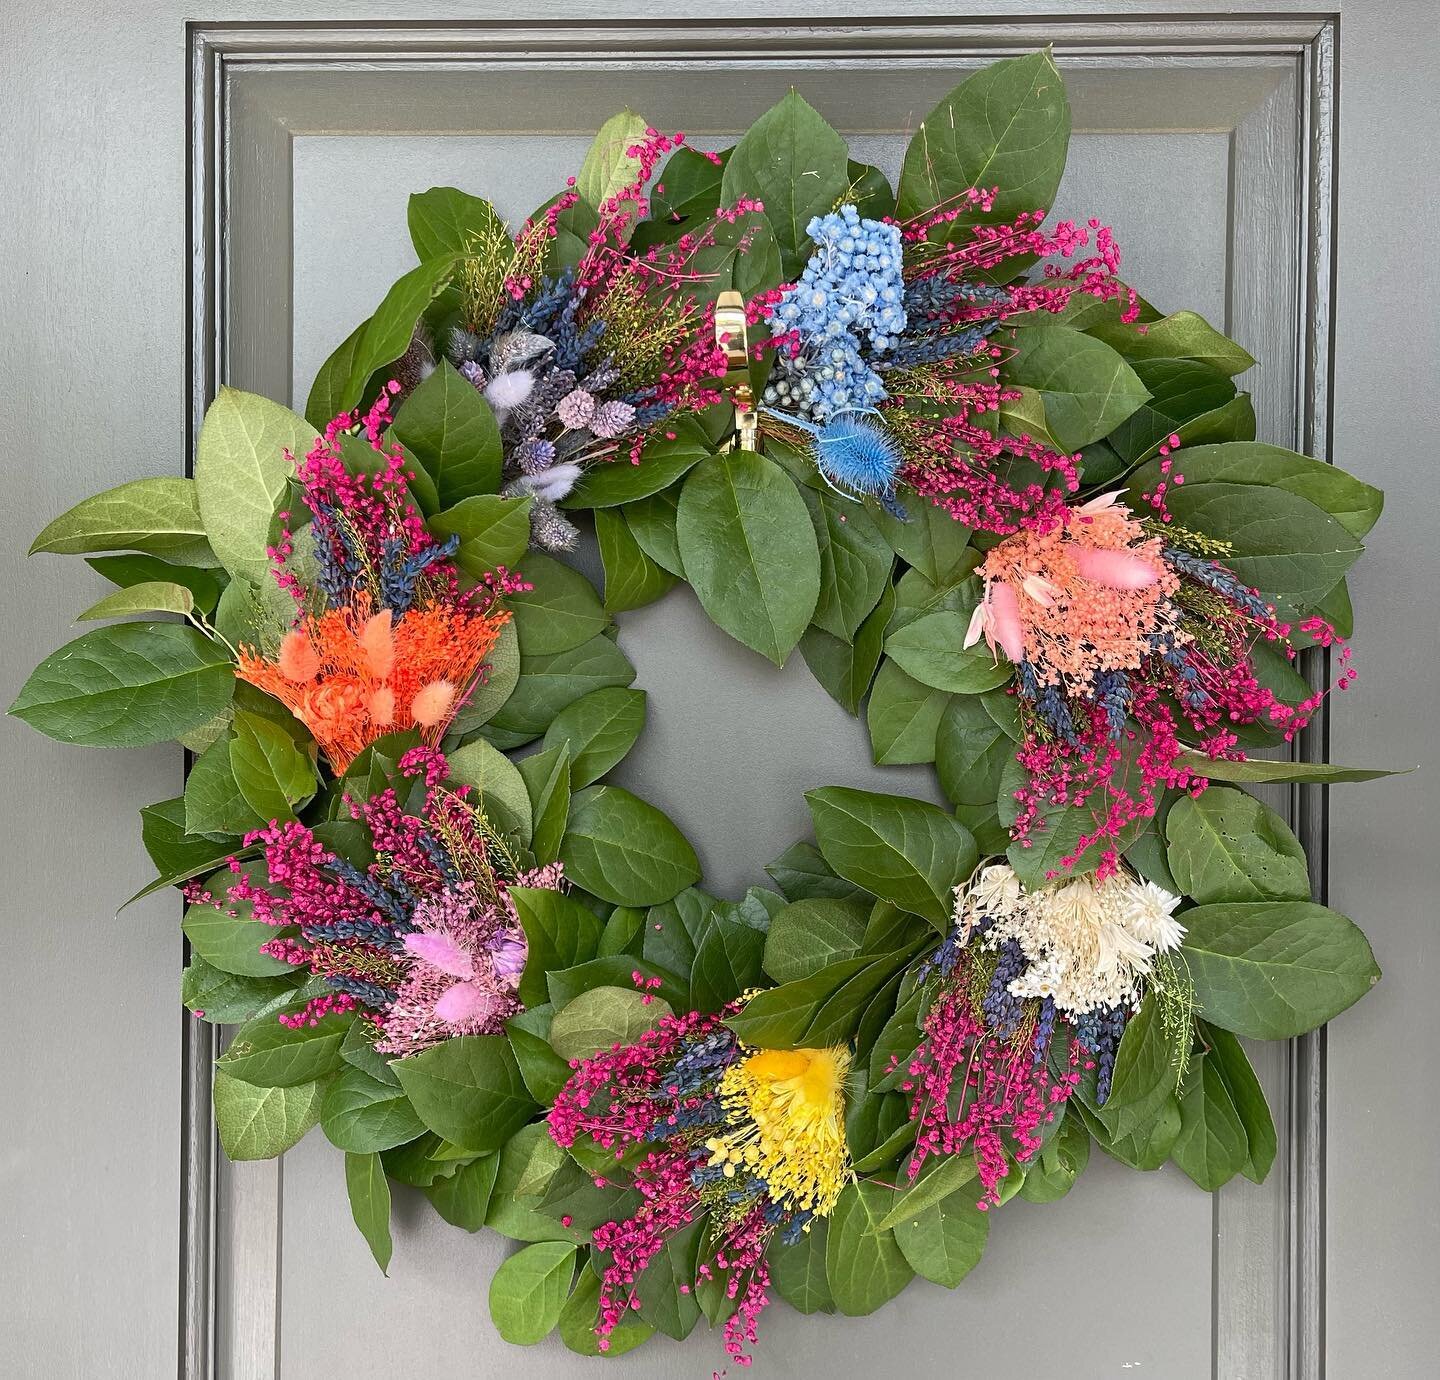 Our Fiesta Forever wreath is now available online! Our website is linked in bio. #fiestasanantonio #fiestawreath #cincodemayowreath #springwreath #summerwreath